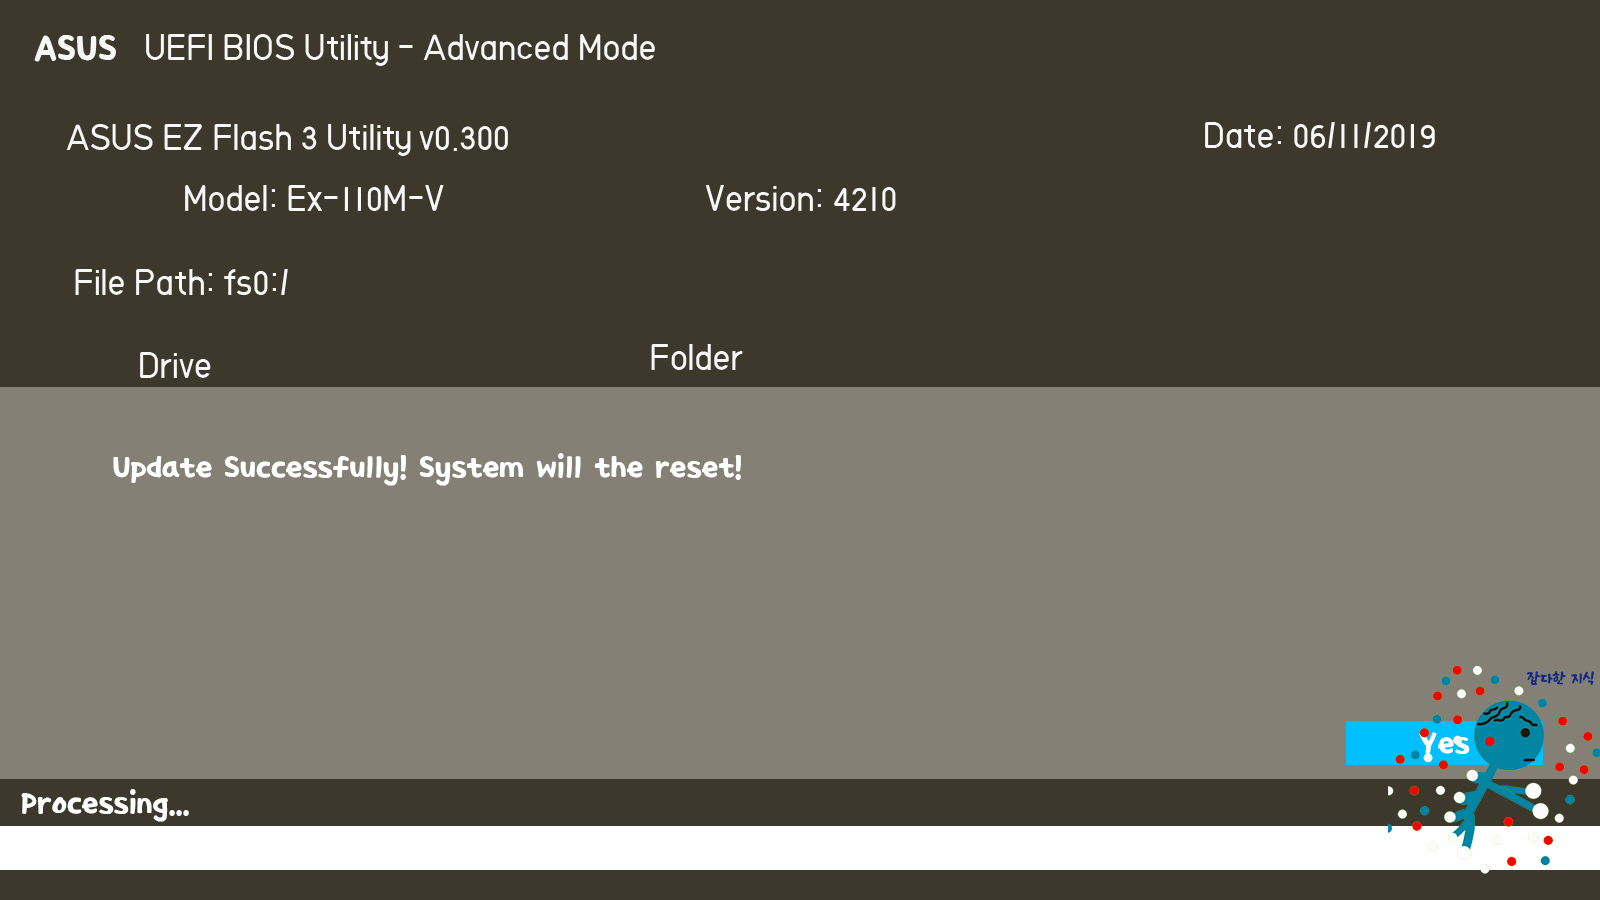 Update successfully! System will be reset!